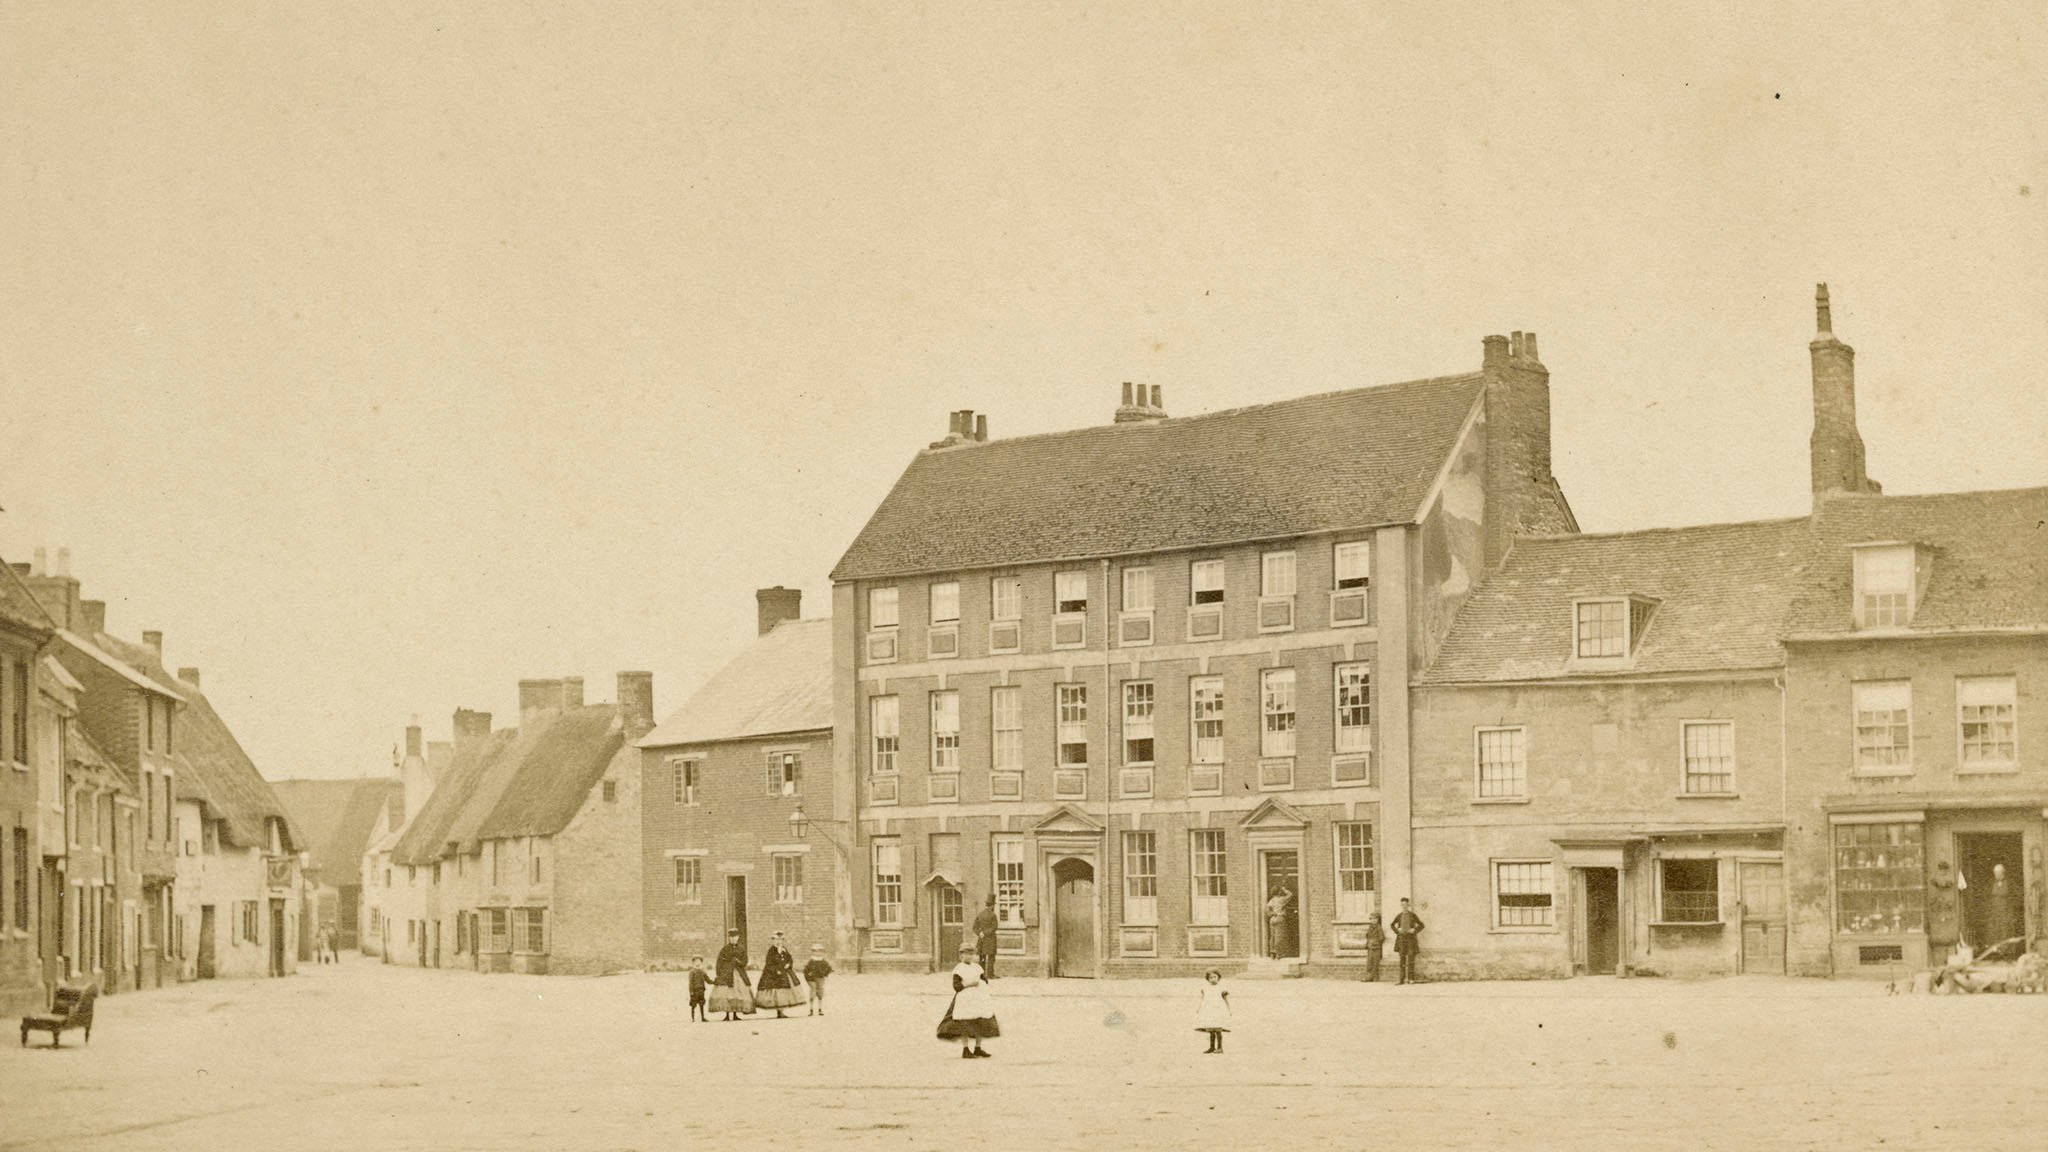 Archive sepia photograph looking across a wide paved space with houses and shops both on the far side and lining a road leading away to the left. People in period costume, mostly children, are standing looking to camera.